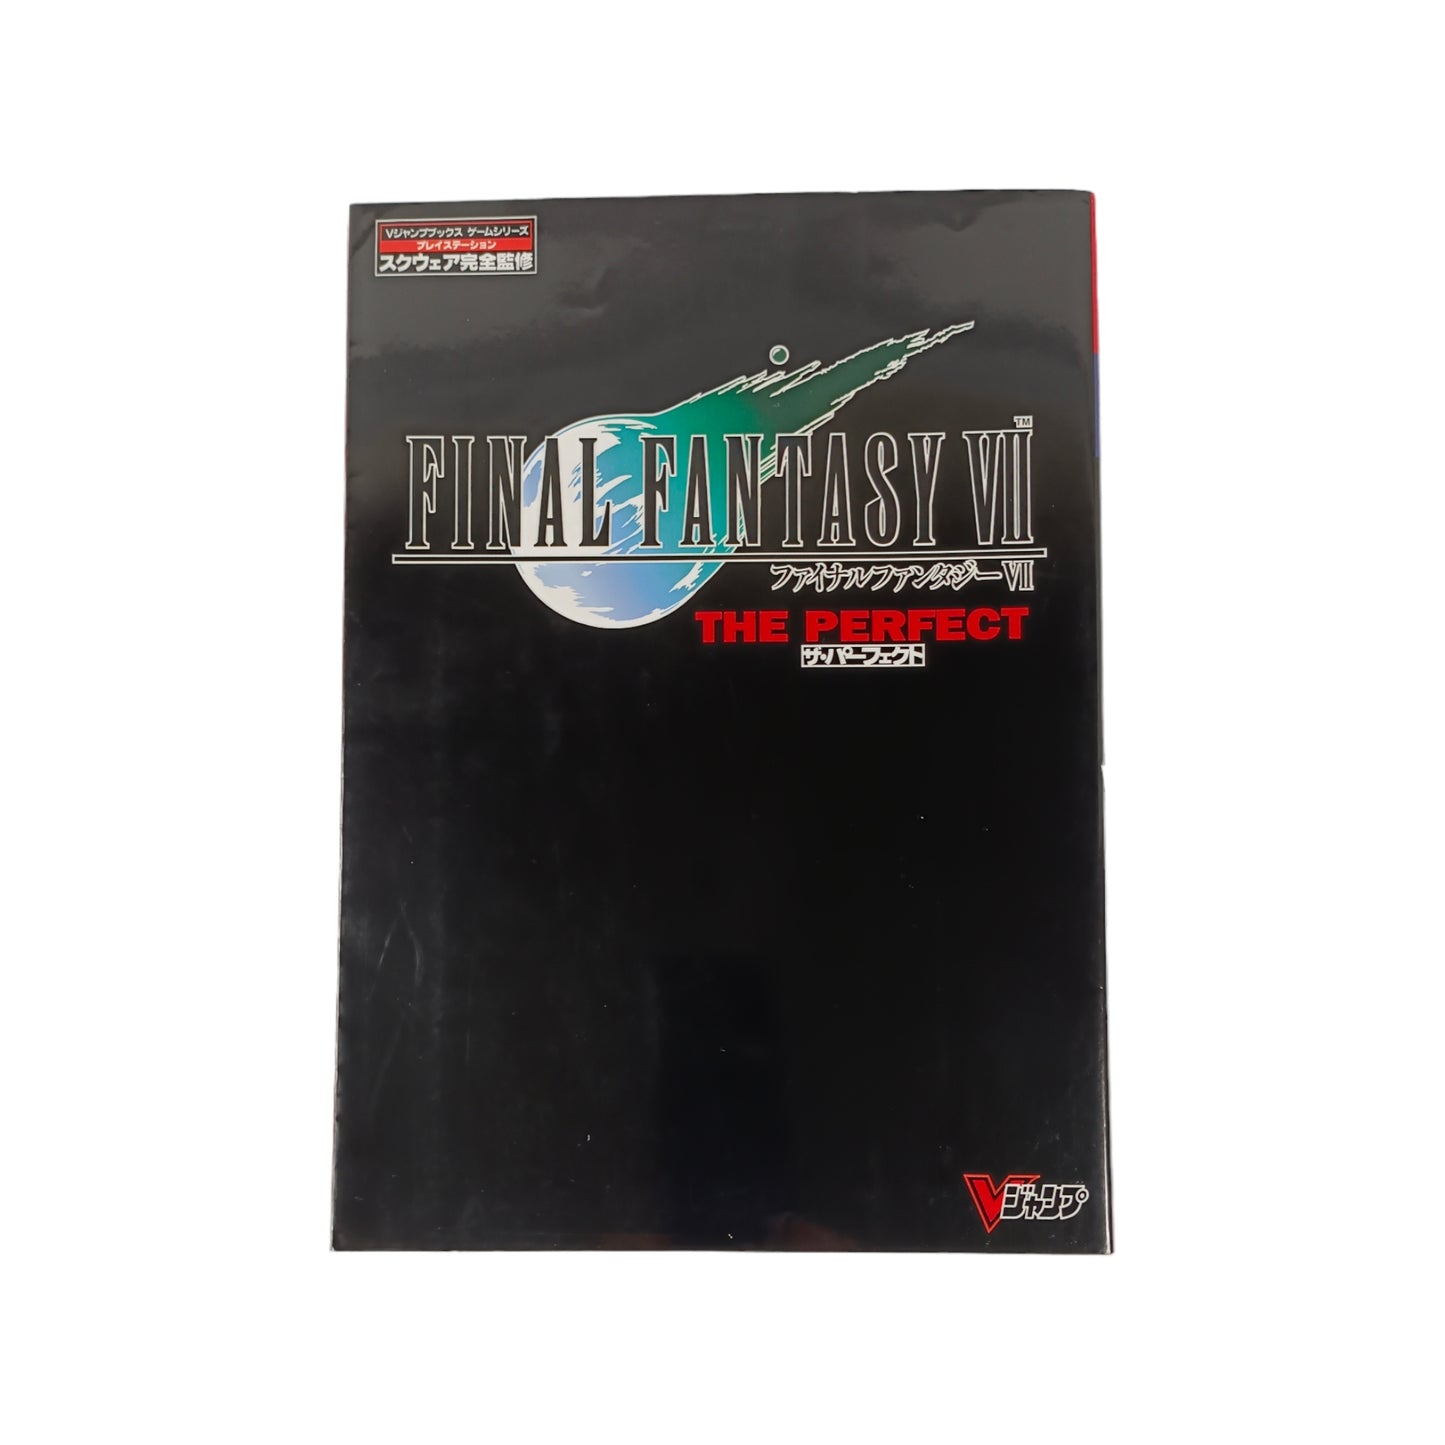 Final Fantasy VII The Perfect